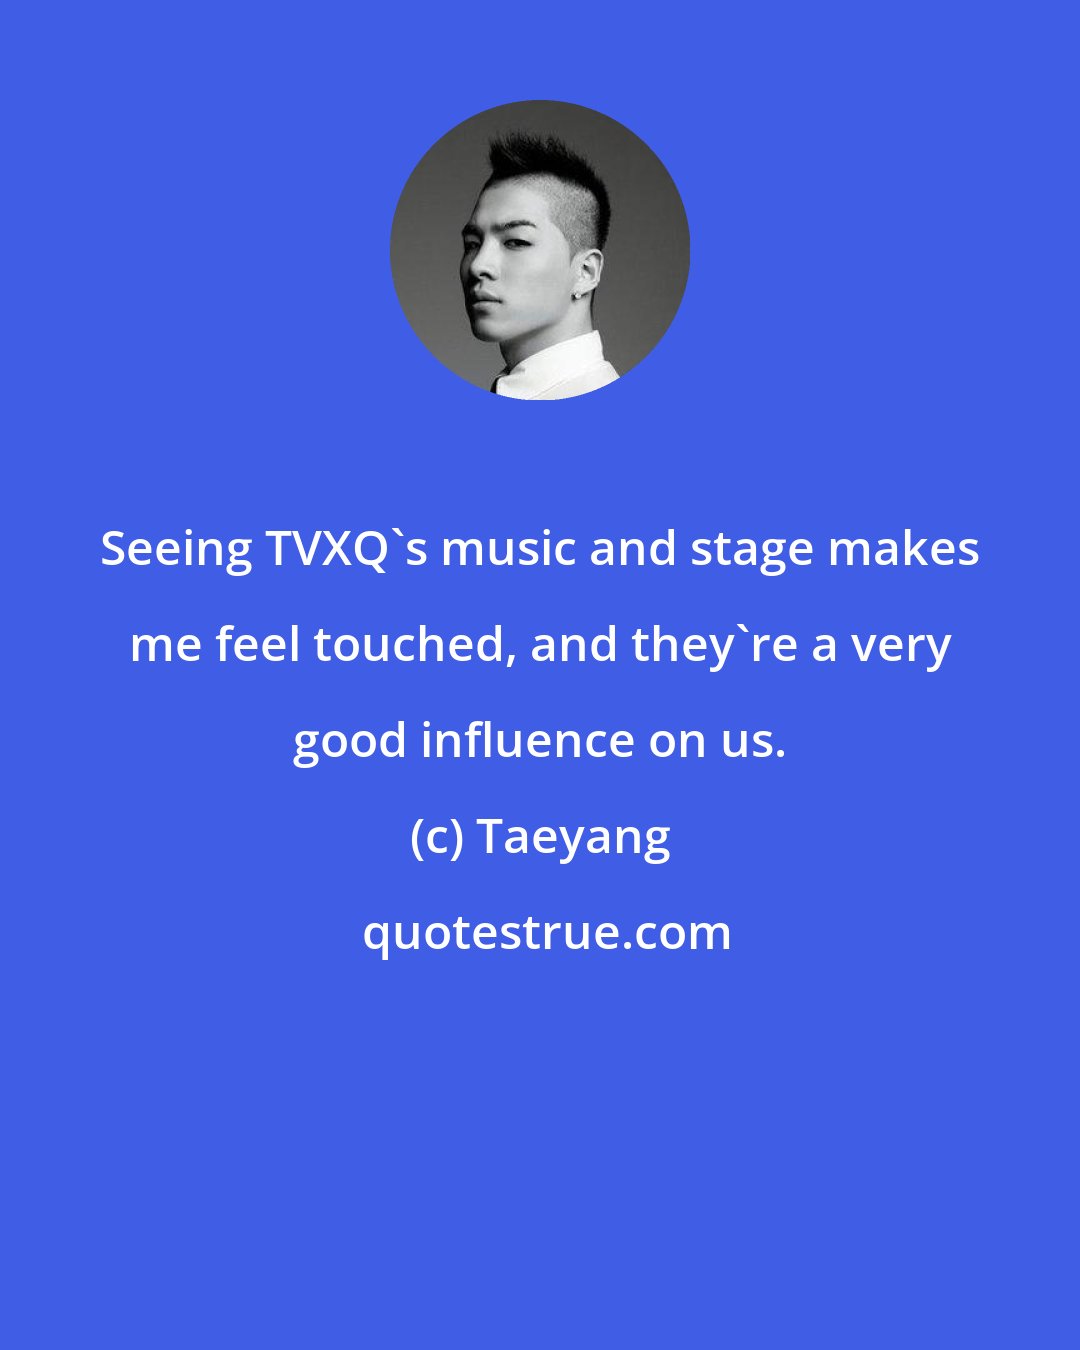 Taeyang: Seeing TVXQ's music and stage makes me feel touched, and they're a very good influence on us.